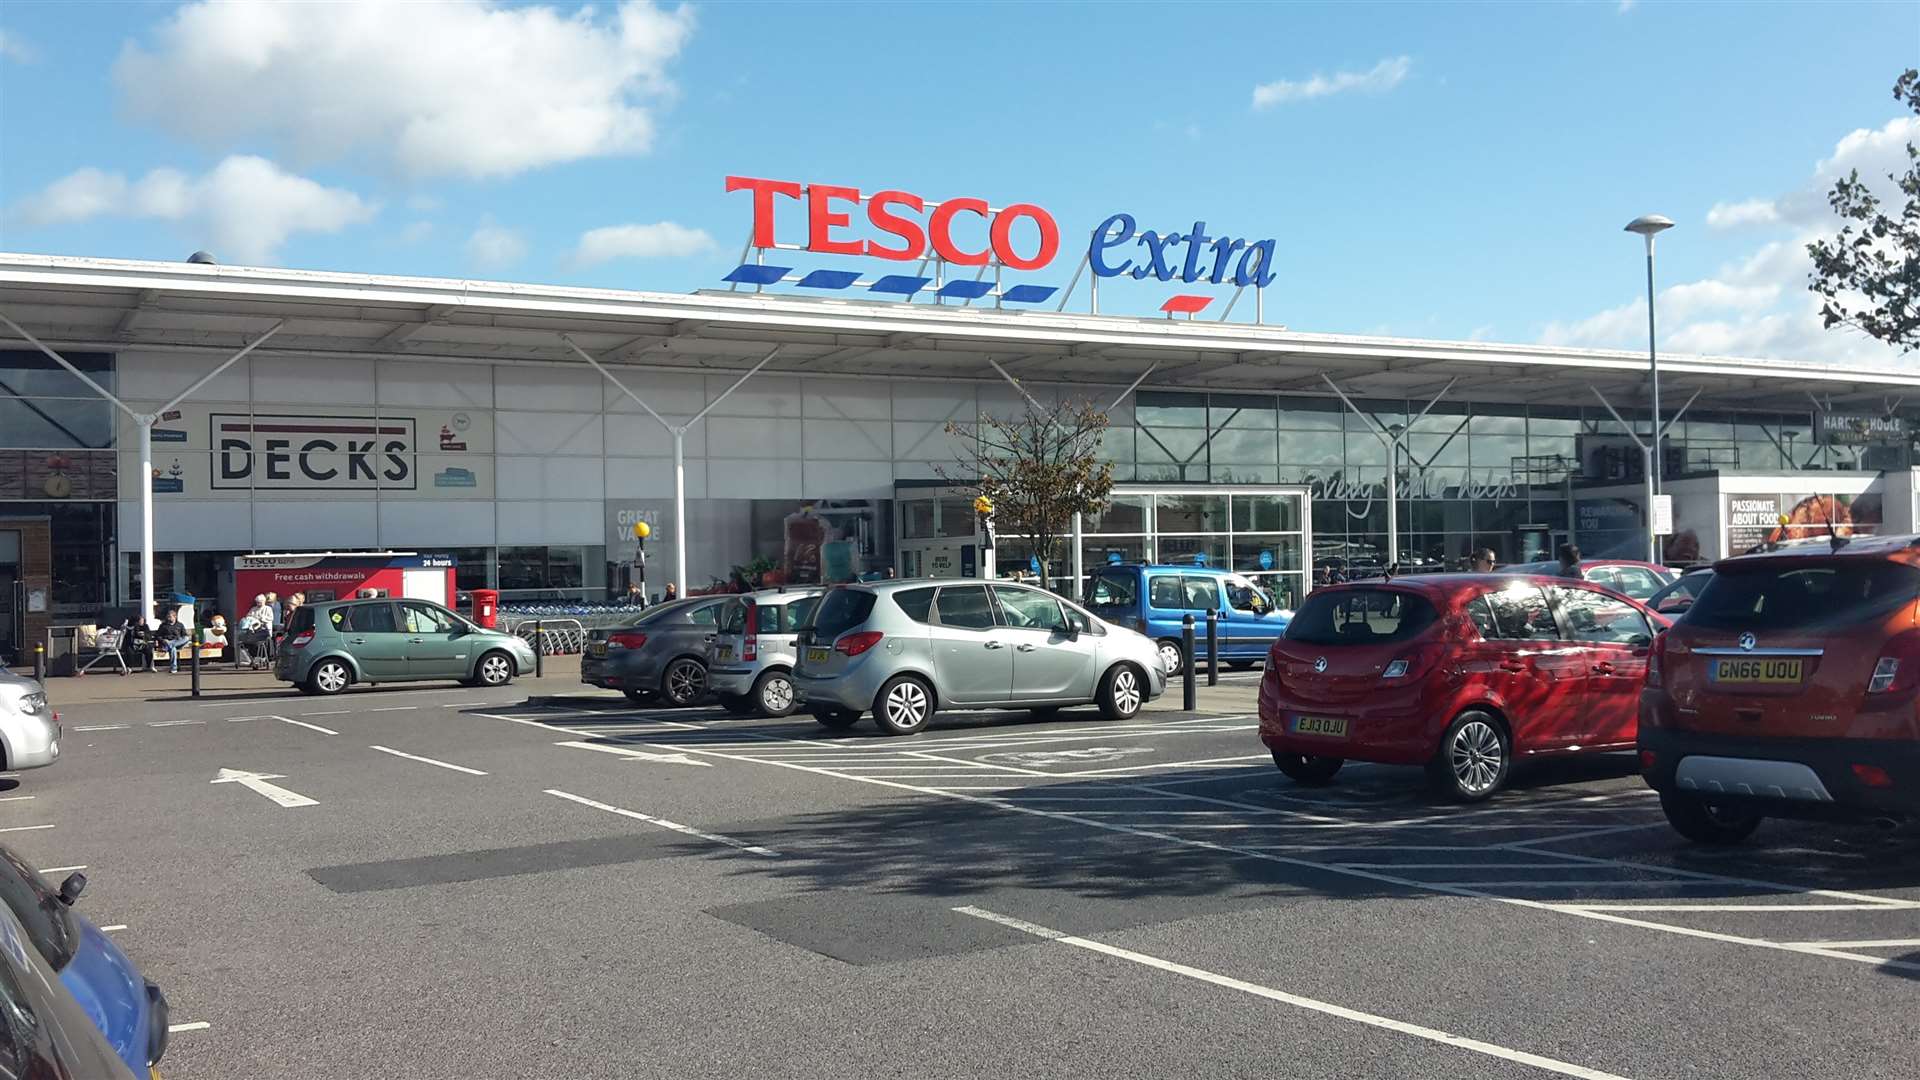 The incident happened at Tesco in Broadstairs